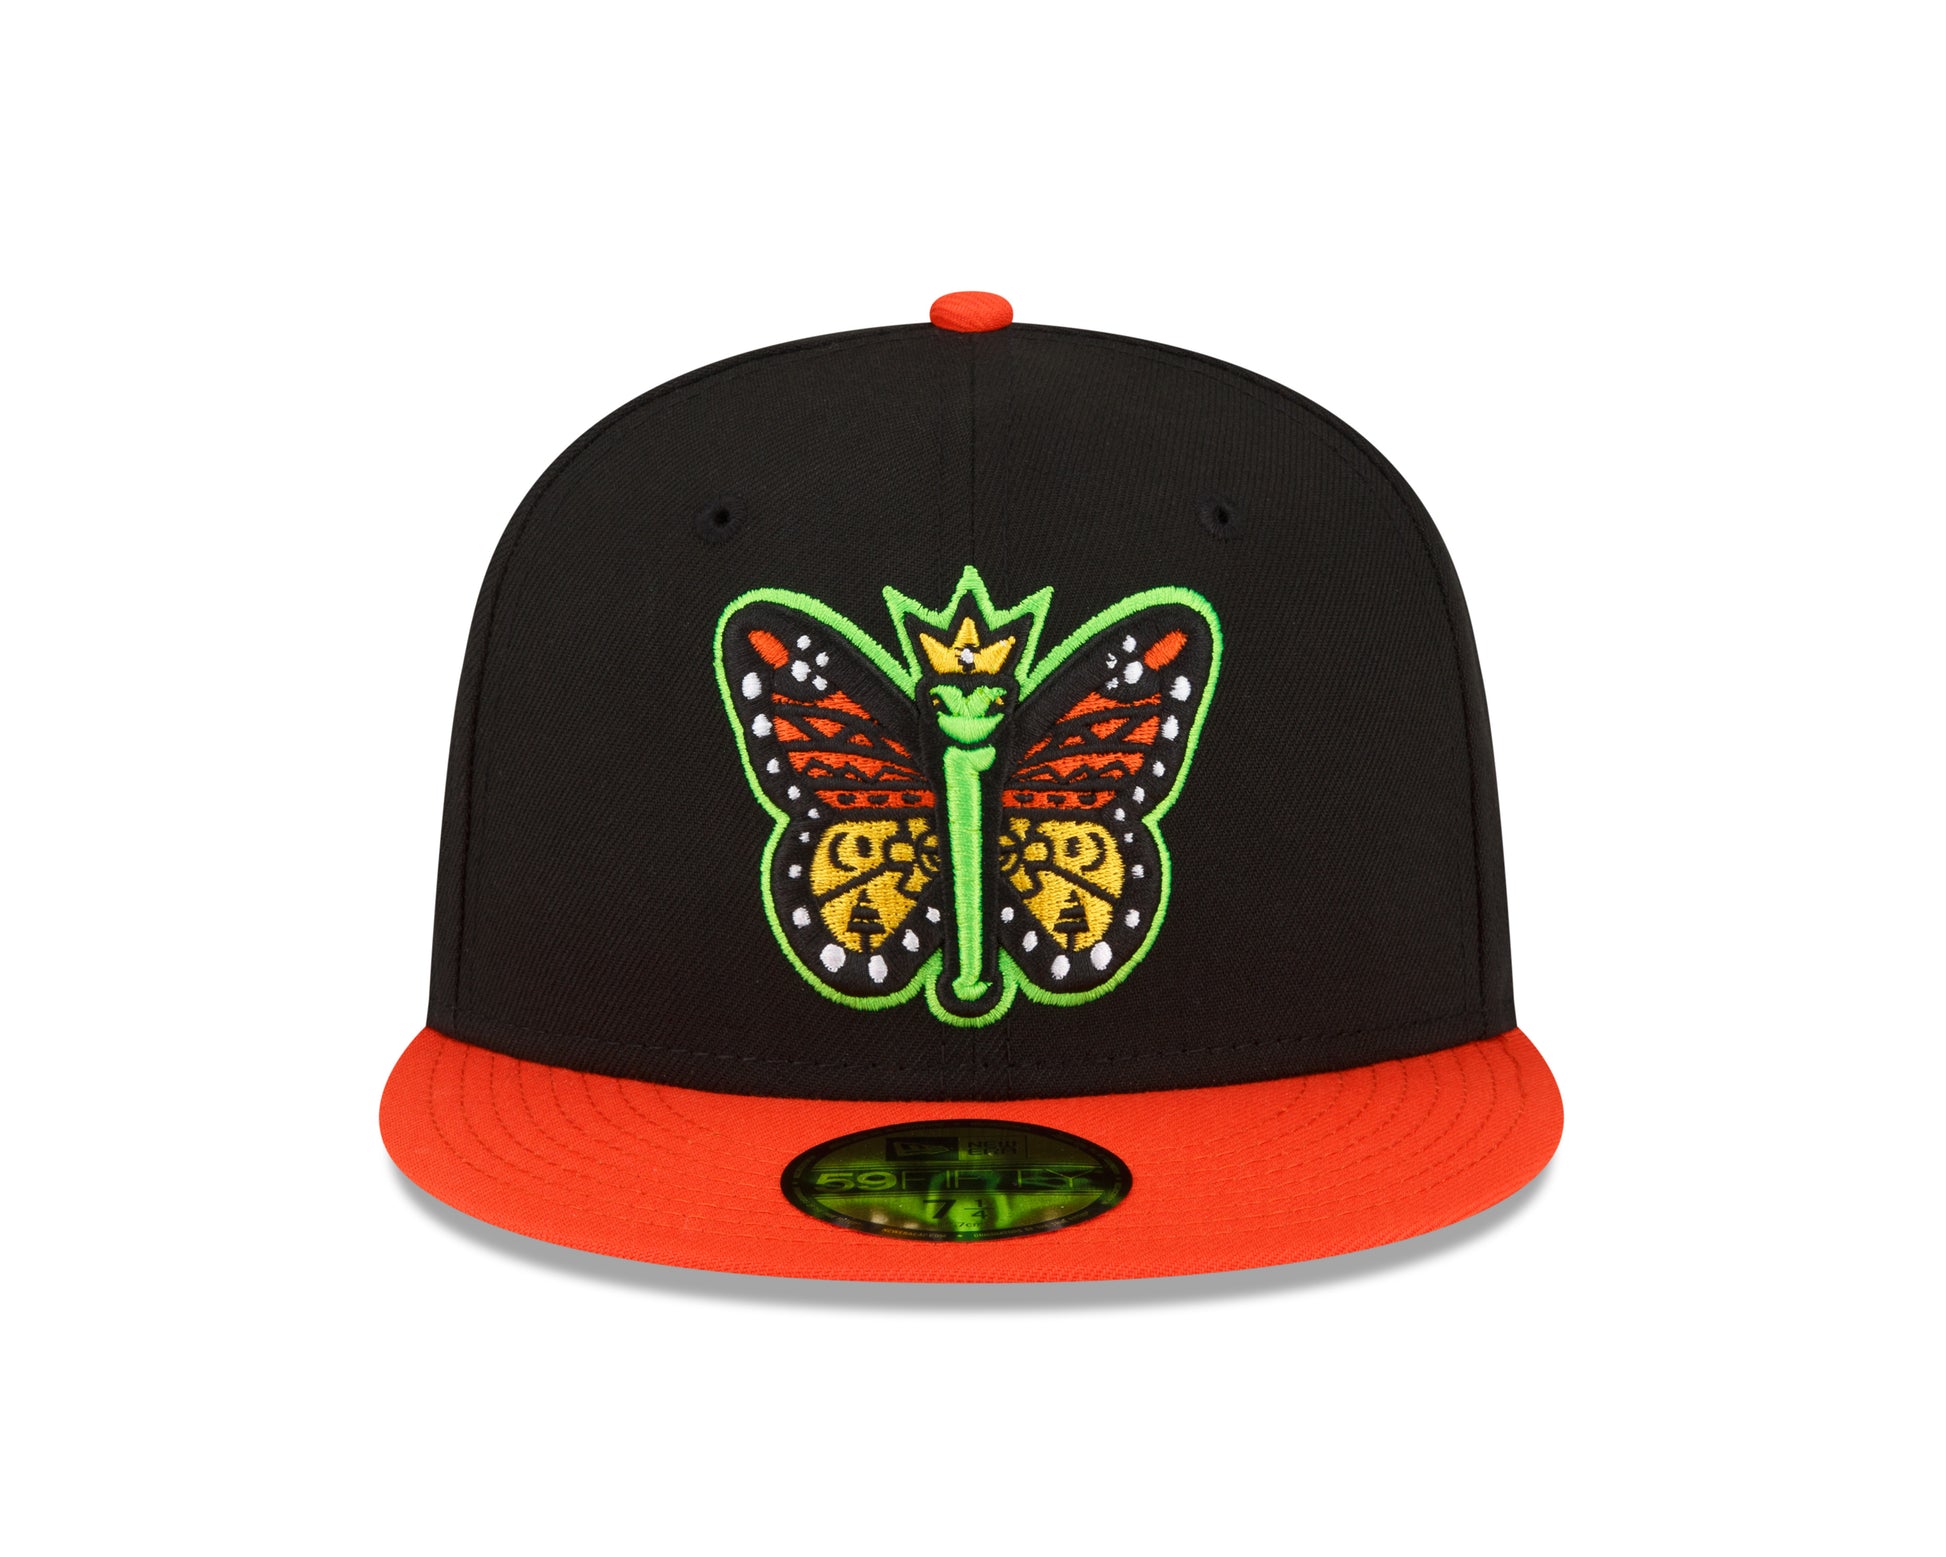 New Era - 59fifty Fitted - MiLB - COPA - Eugene Emeralds - Black/Red - Headz Up 